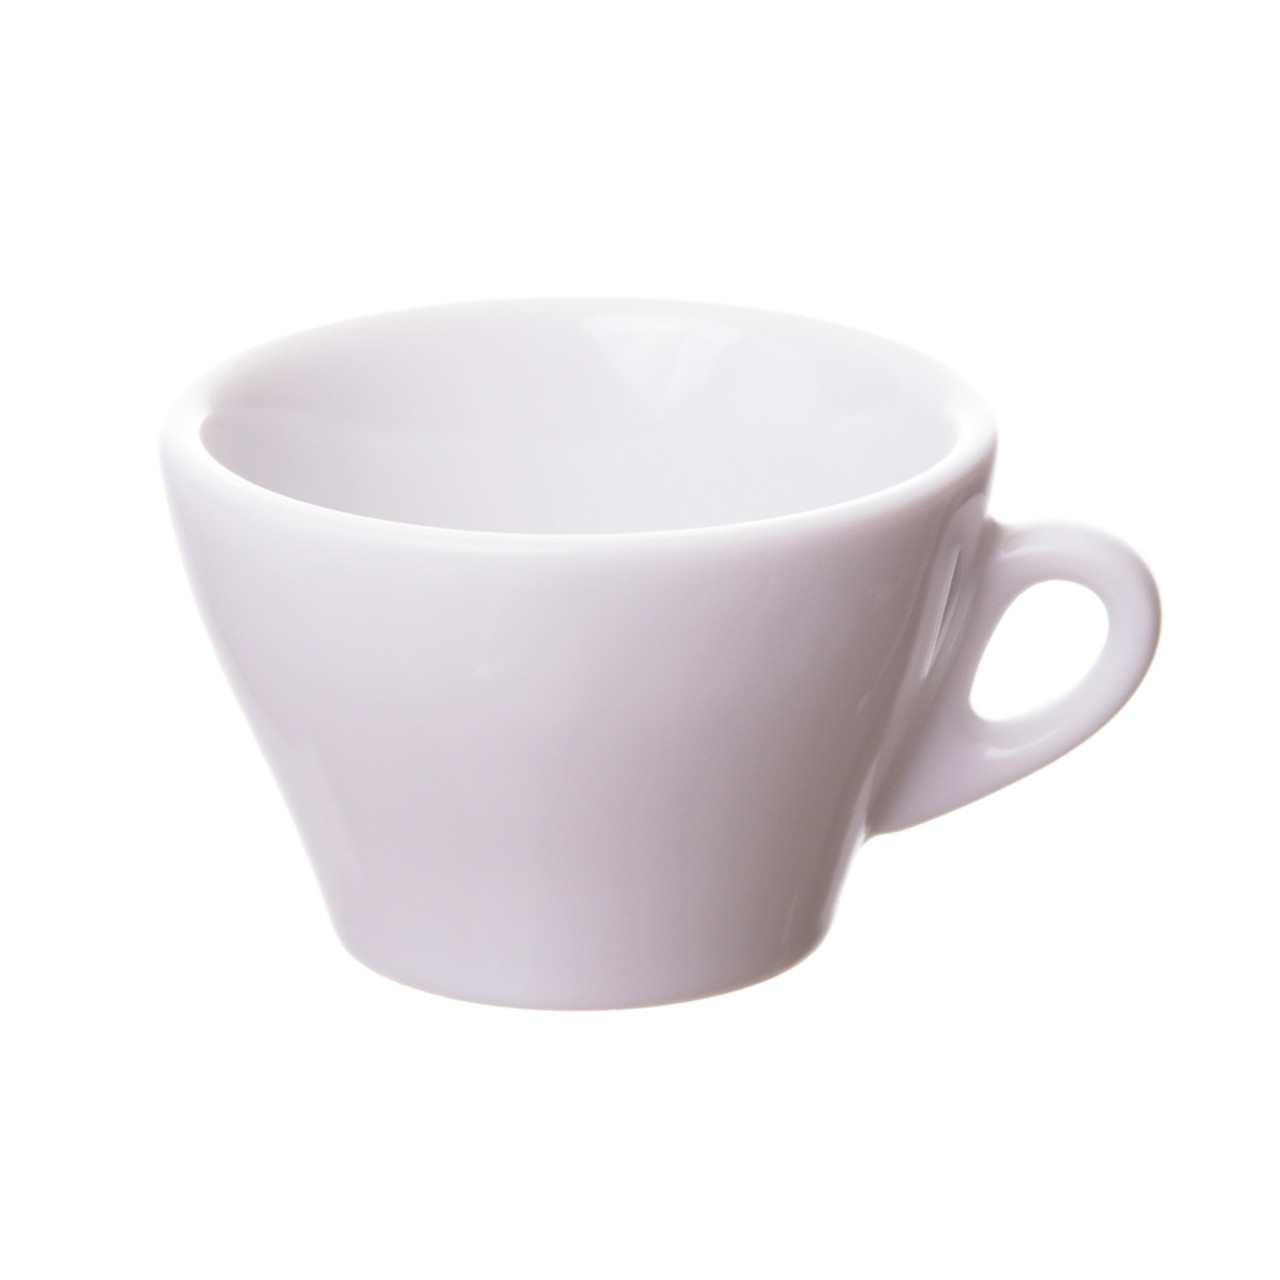 https://cdn11.bigcommerce.com/s-6h7ychjk4/images/stencil/1280x1280/products/7862/88041/torino-5-ounce-competitino-cappuccino-cup__58823.1597178636.jpg?c=1&imbypass=on